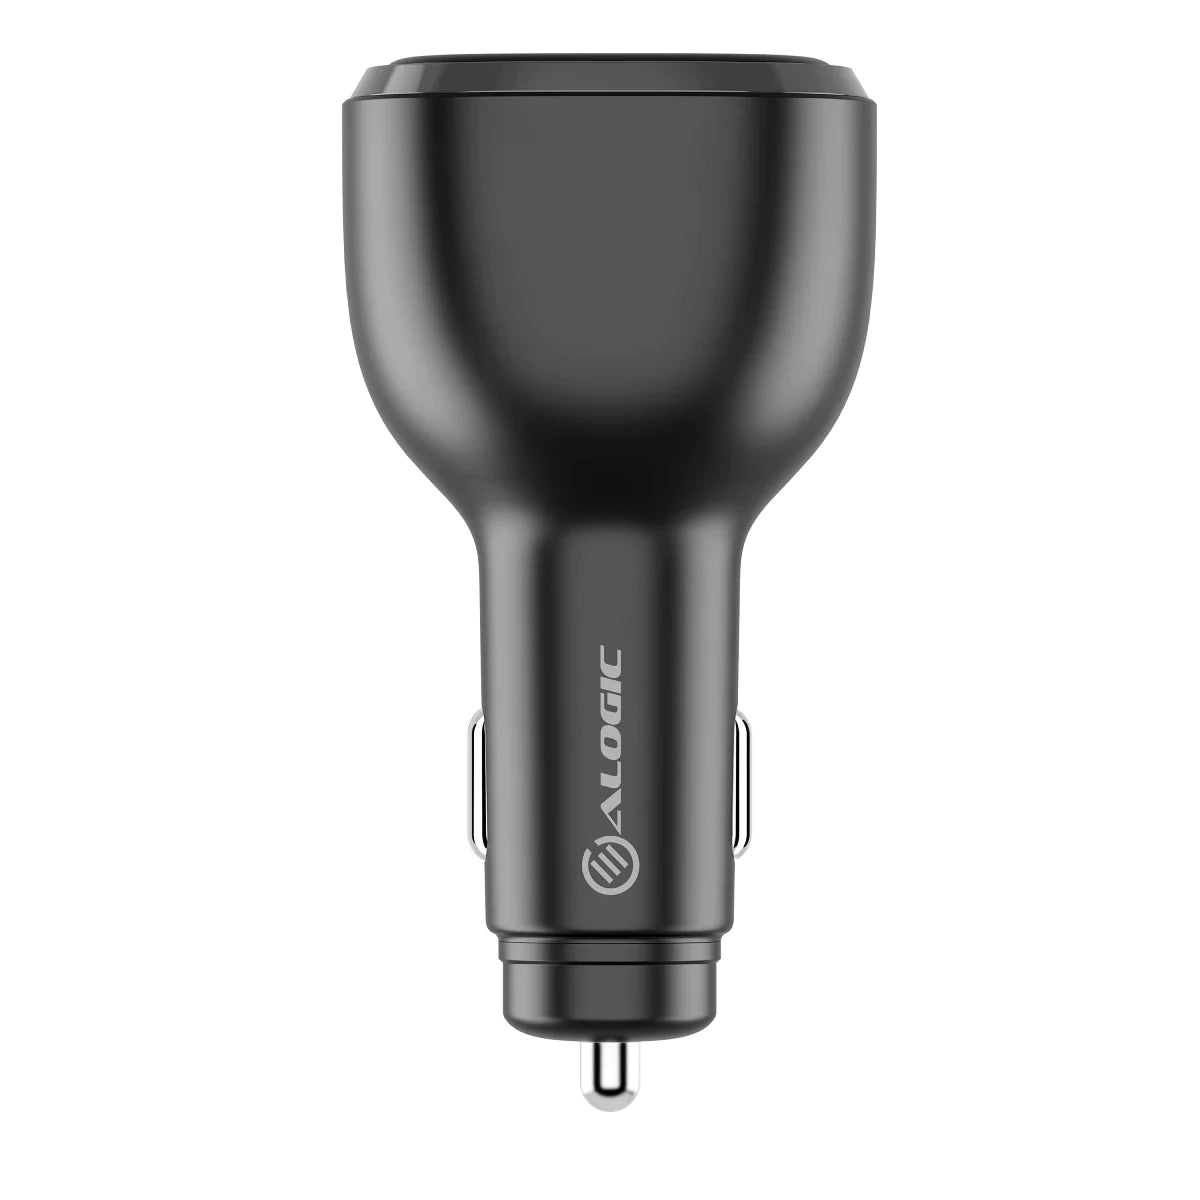 rapid-power-165w-car-charger-with-2x-usb-c-ports-1x-usb-a-port2